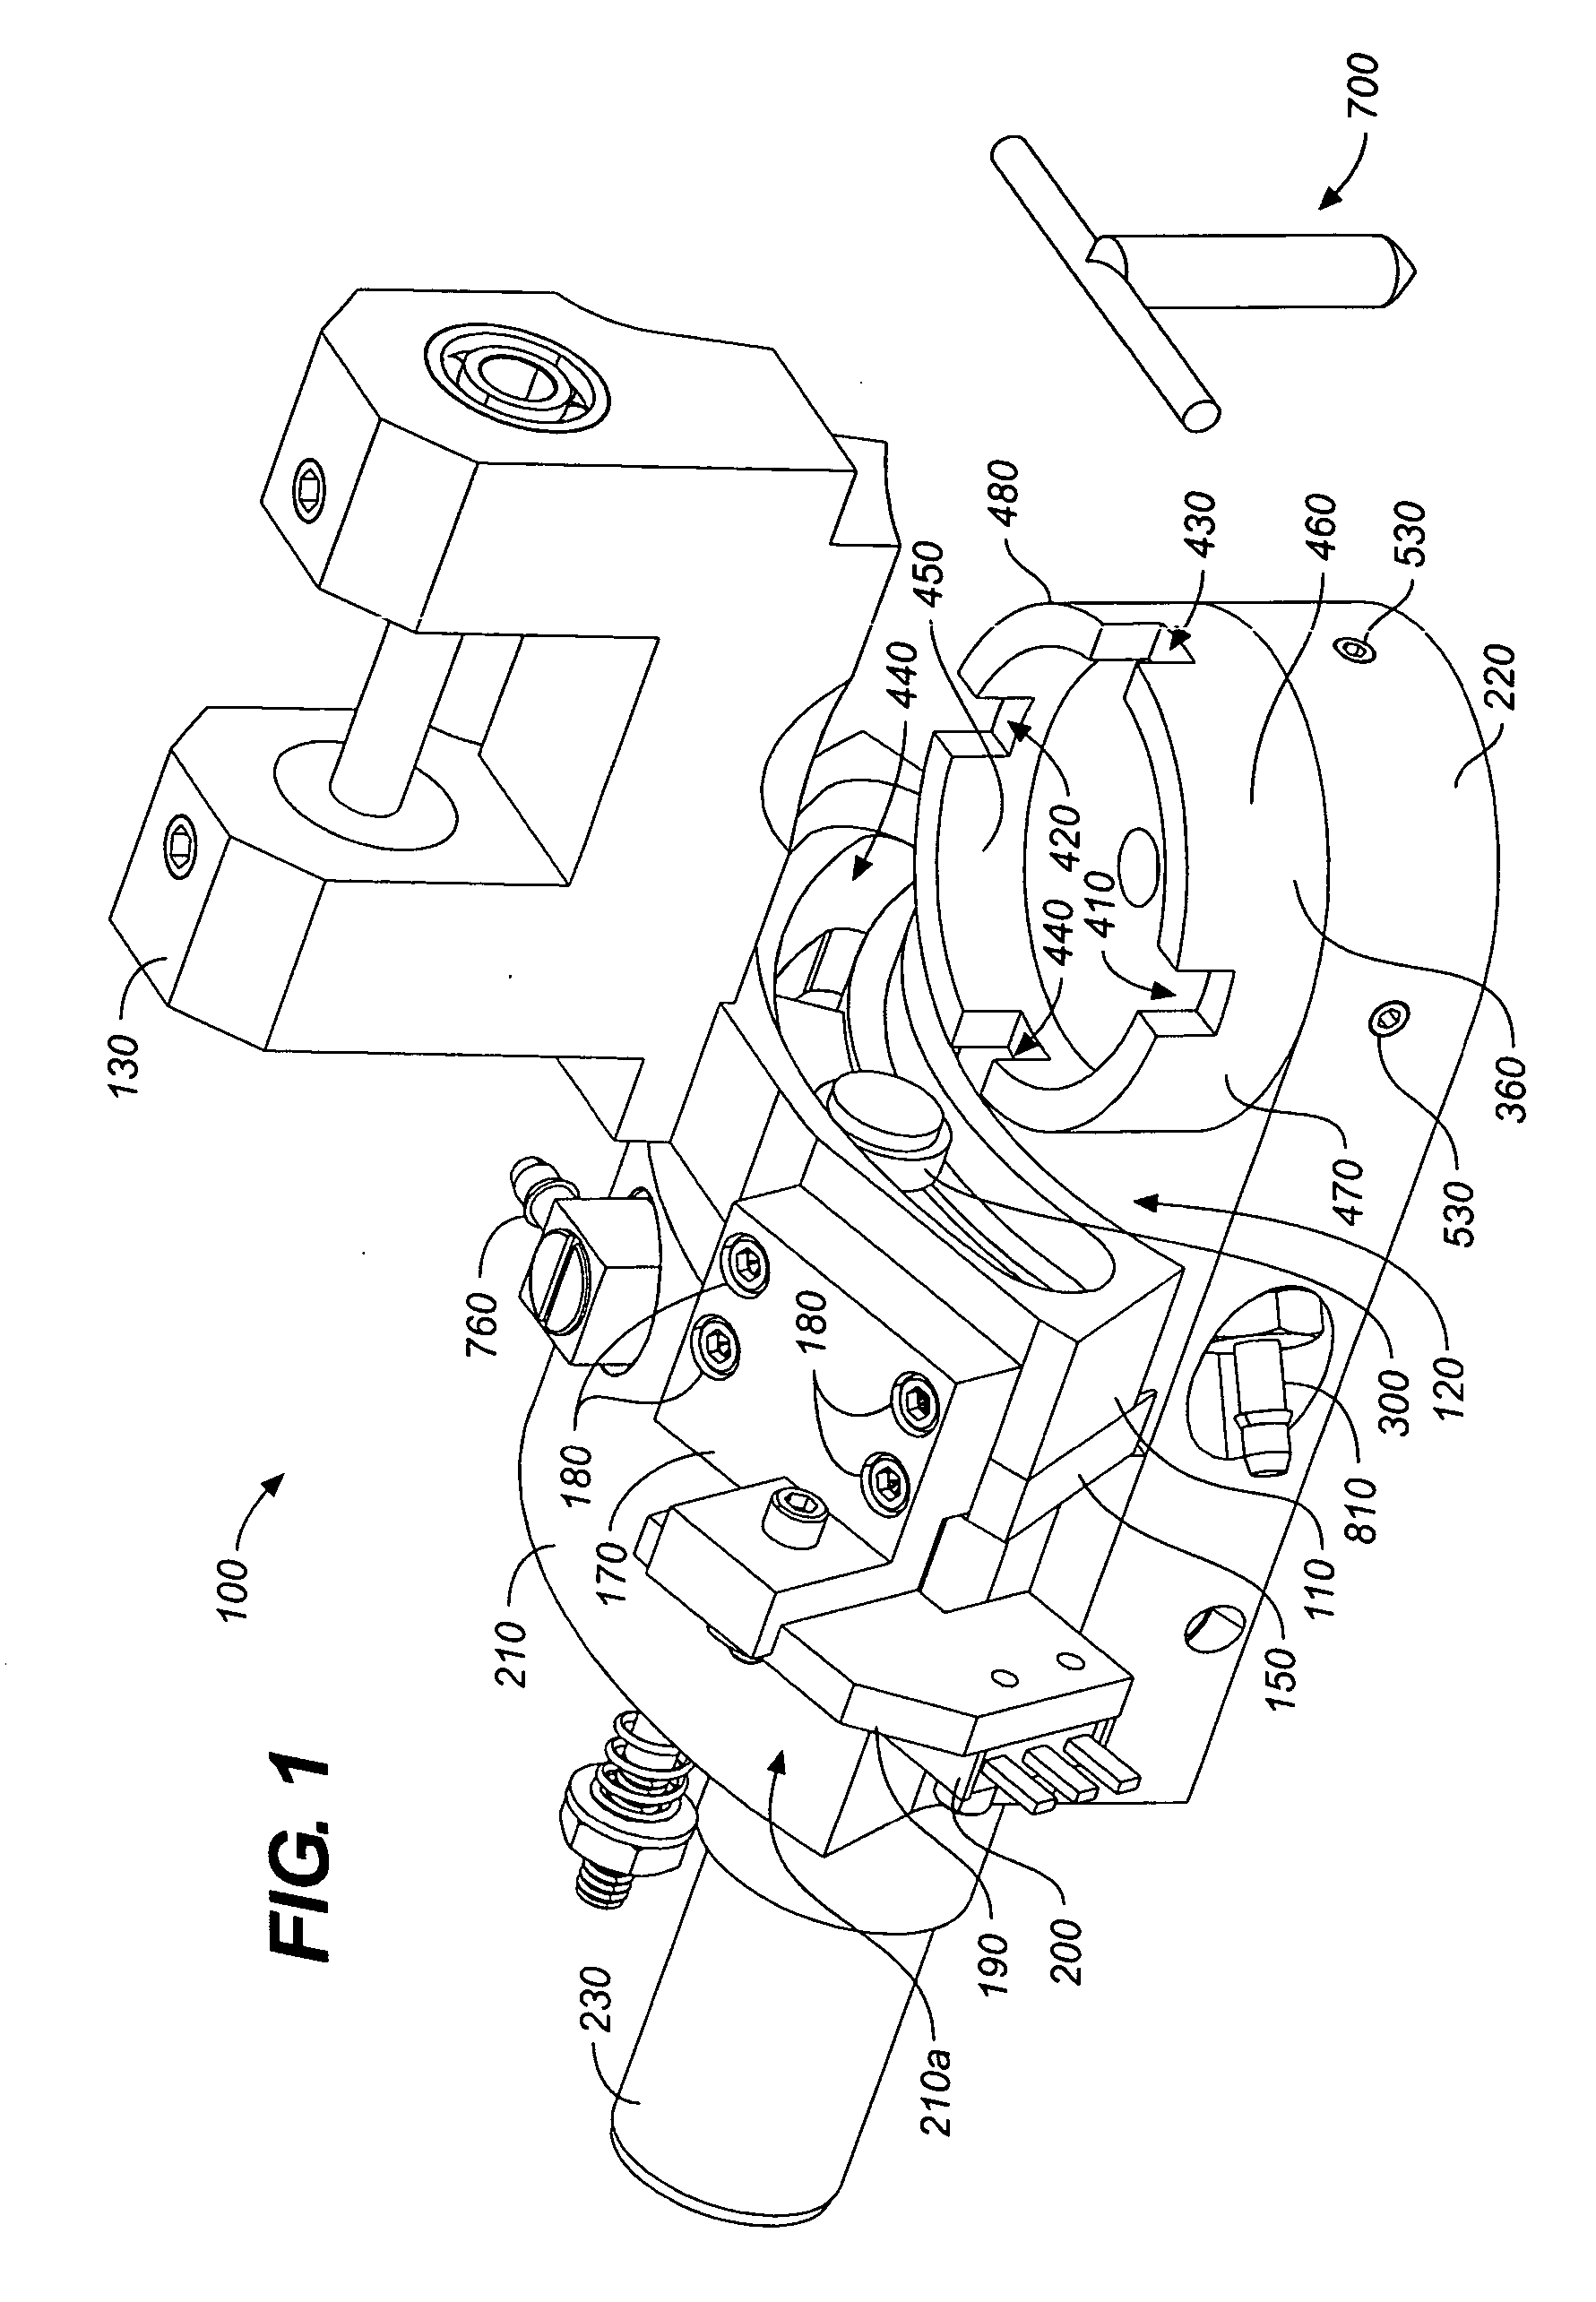 Automatic tool tilting apparatus for a scribe tool